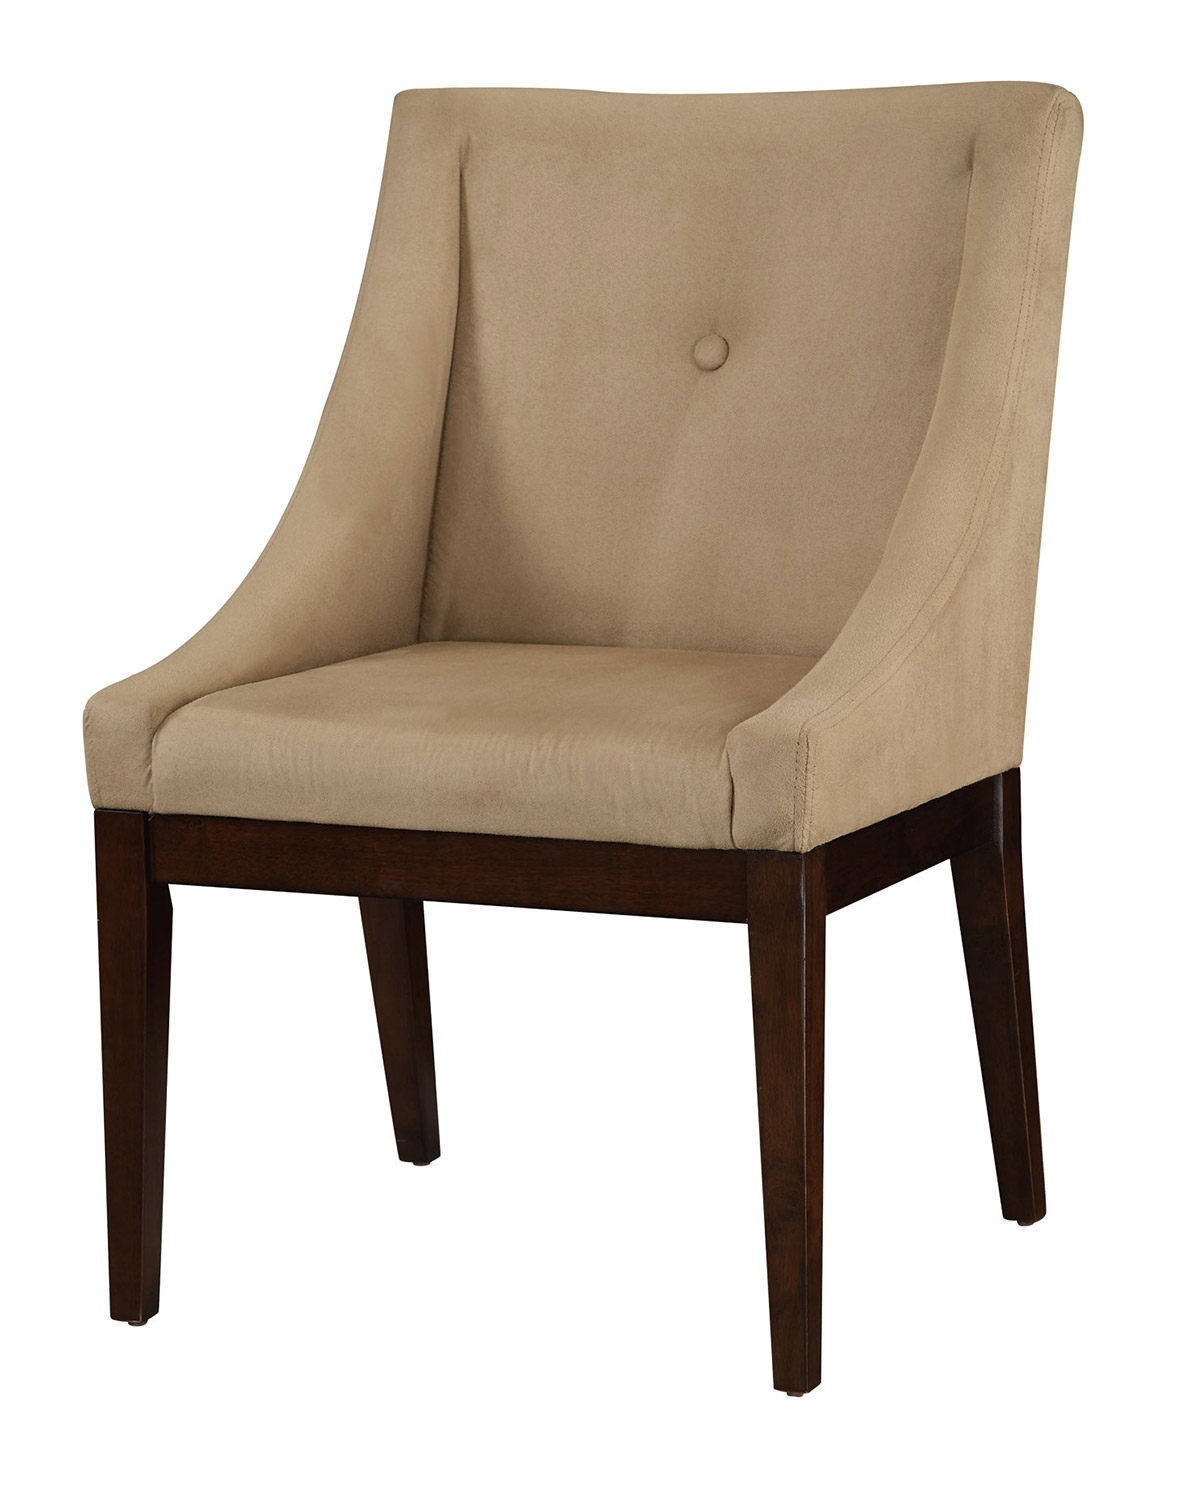 Coaster Microvelvet Accent Chair - Taupe